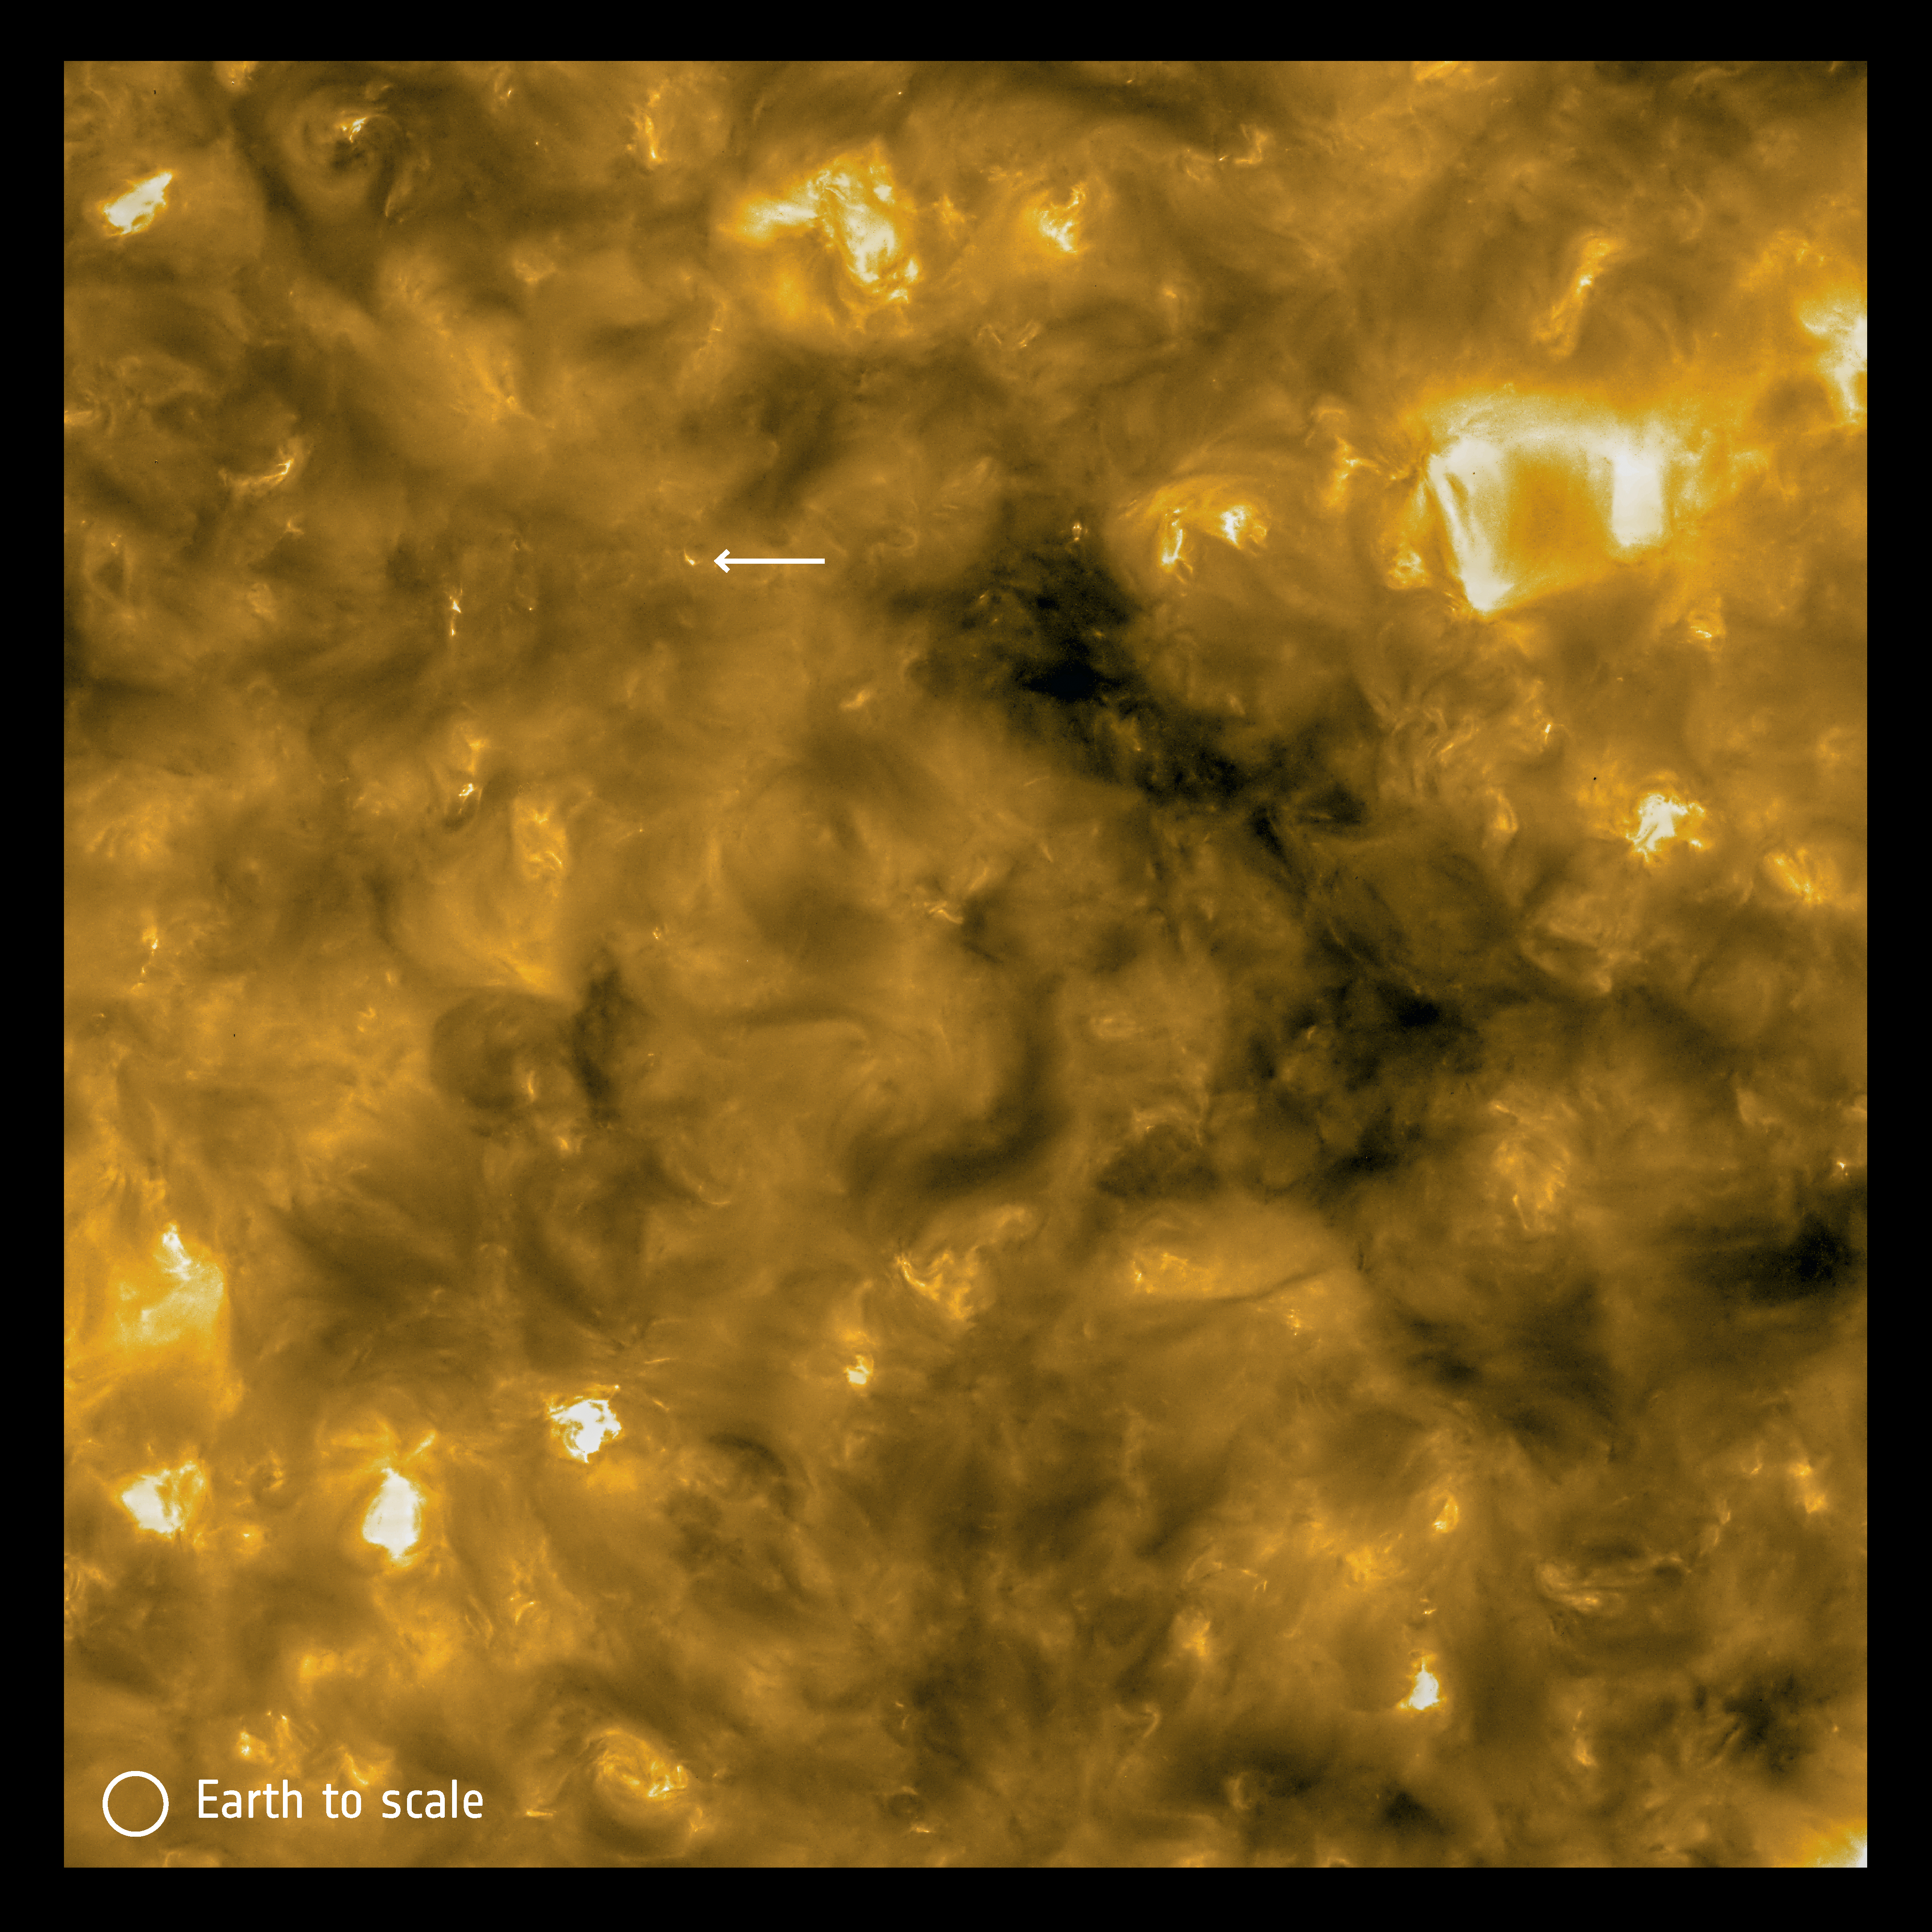 Scientists spot what they call small campfires on the surface of the Sun.